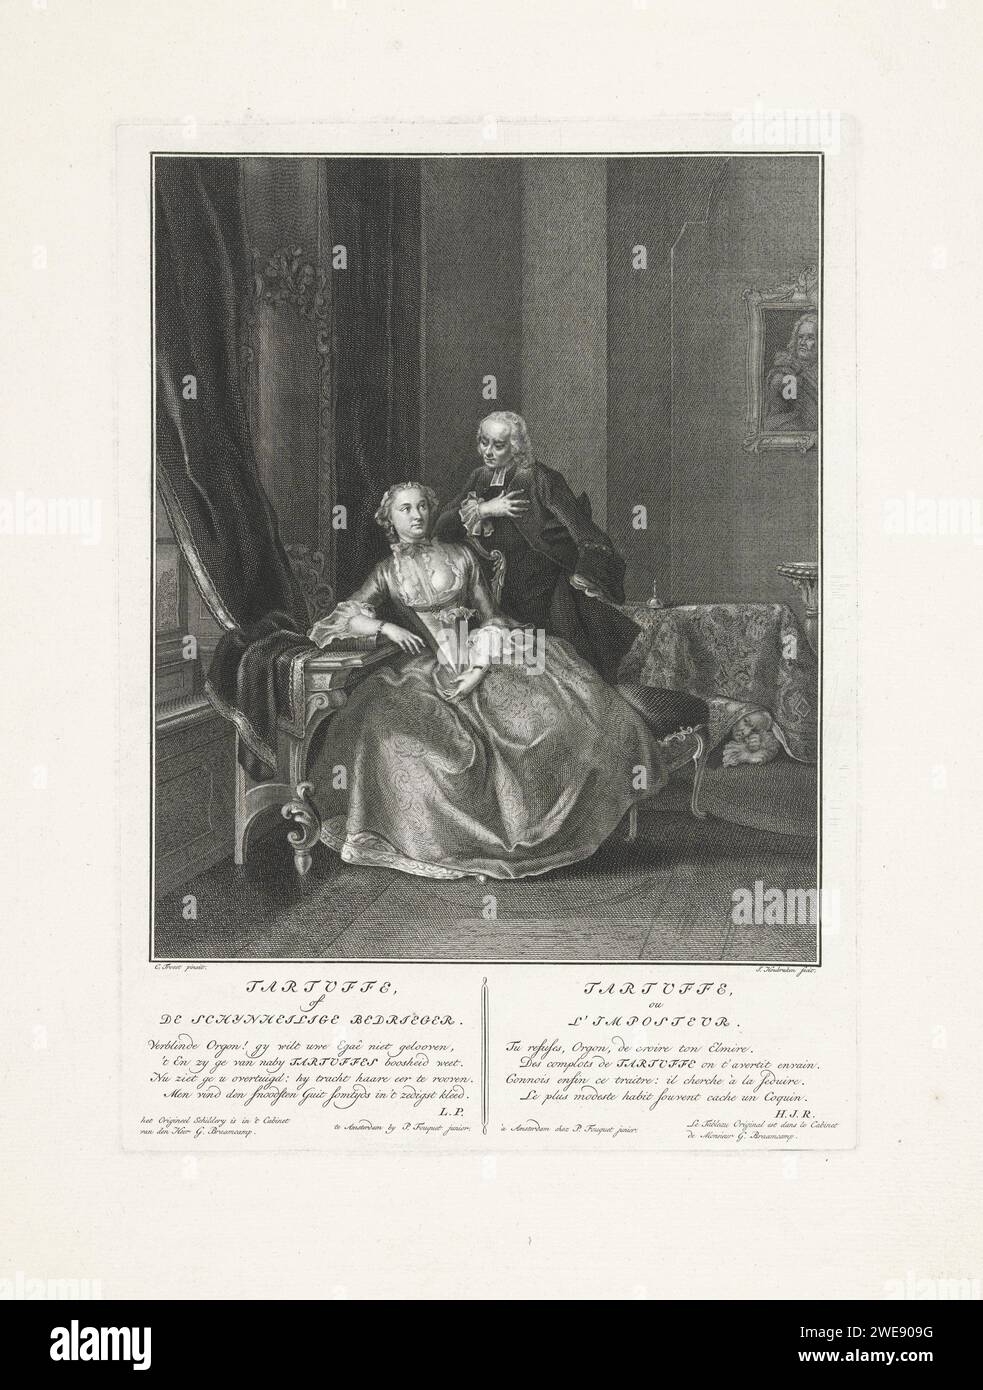 Tartuffe or the hypocritical cheaper, Jacob Houbraken, after Cornelis Troost, 1760 - 1780 print Interior with a lady, Elmire and a Lord, Tartuffe. In the background there is a second man under a table, orgon. Scene from the play Tartuffe van Molière from 1664: the lady, Elmire, dressed in a dress with deep cleavage sits on a chair, her right arm leaning on a thick book on a table. Behind her is the character Tartuffe, who tries to seduce her. In the background you can see how under a table her husband orgon touches the two. Through this list, Elmire convinces her husband that his blind trust i Stock Photo